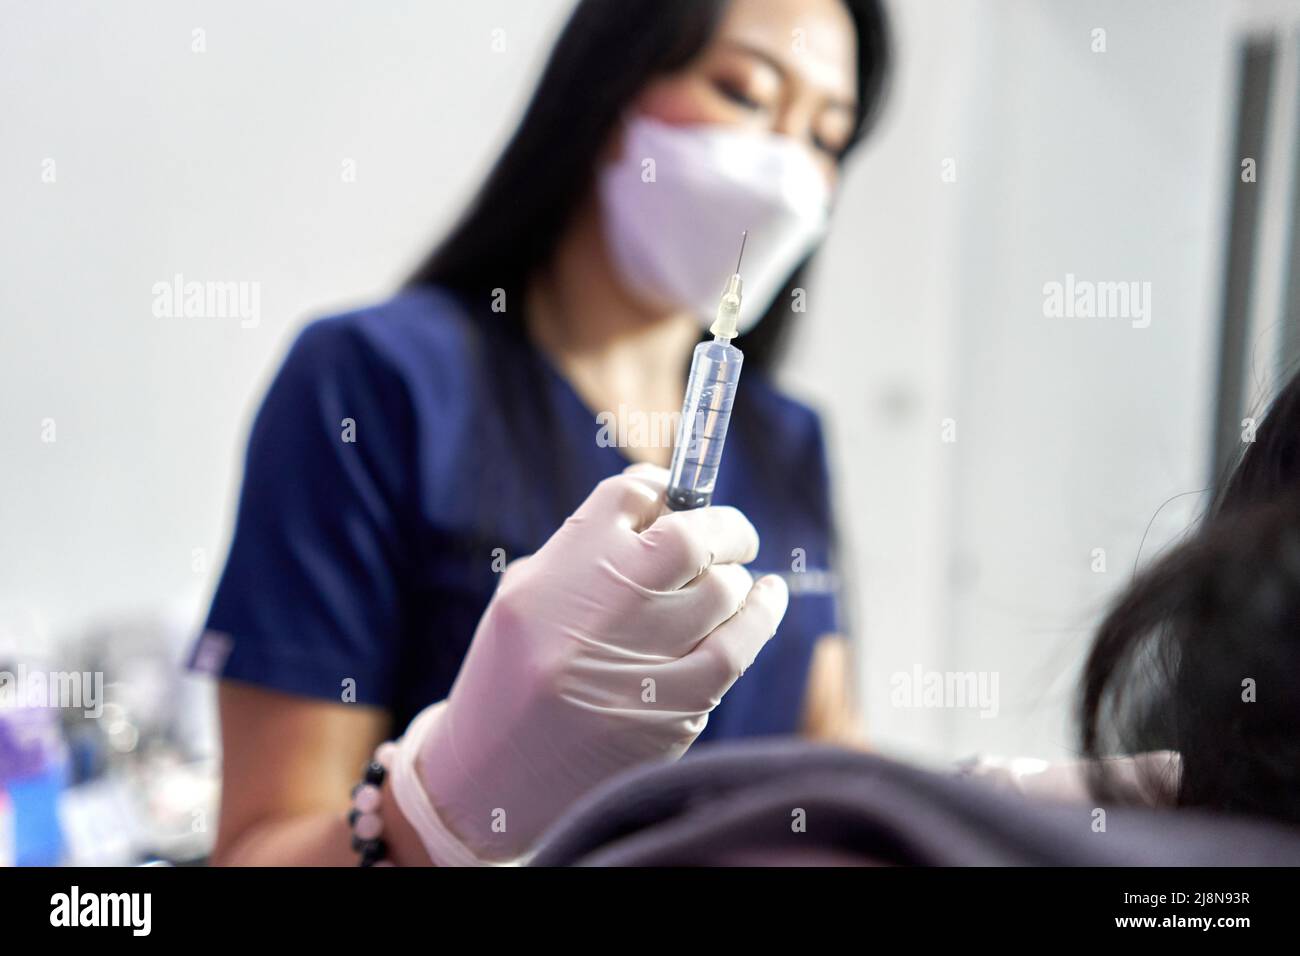 Focus on the hand of a doctor holding a botox injection for a patient Stock Photo